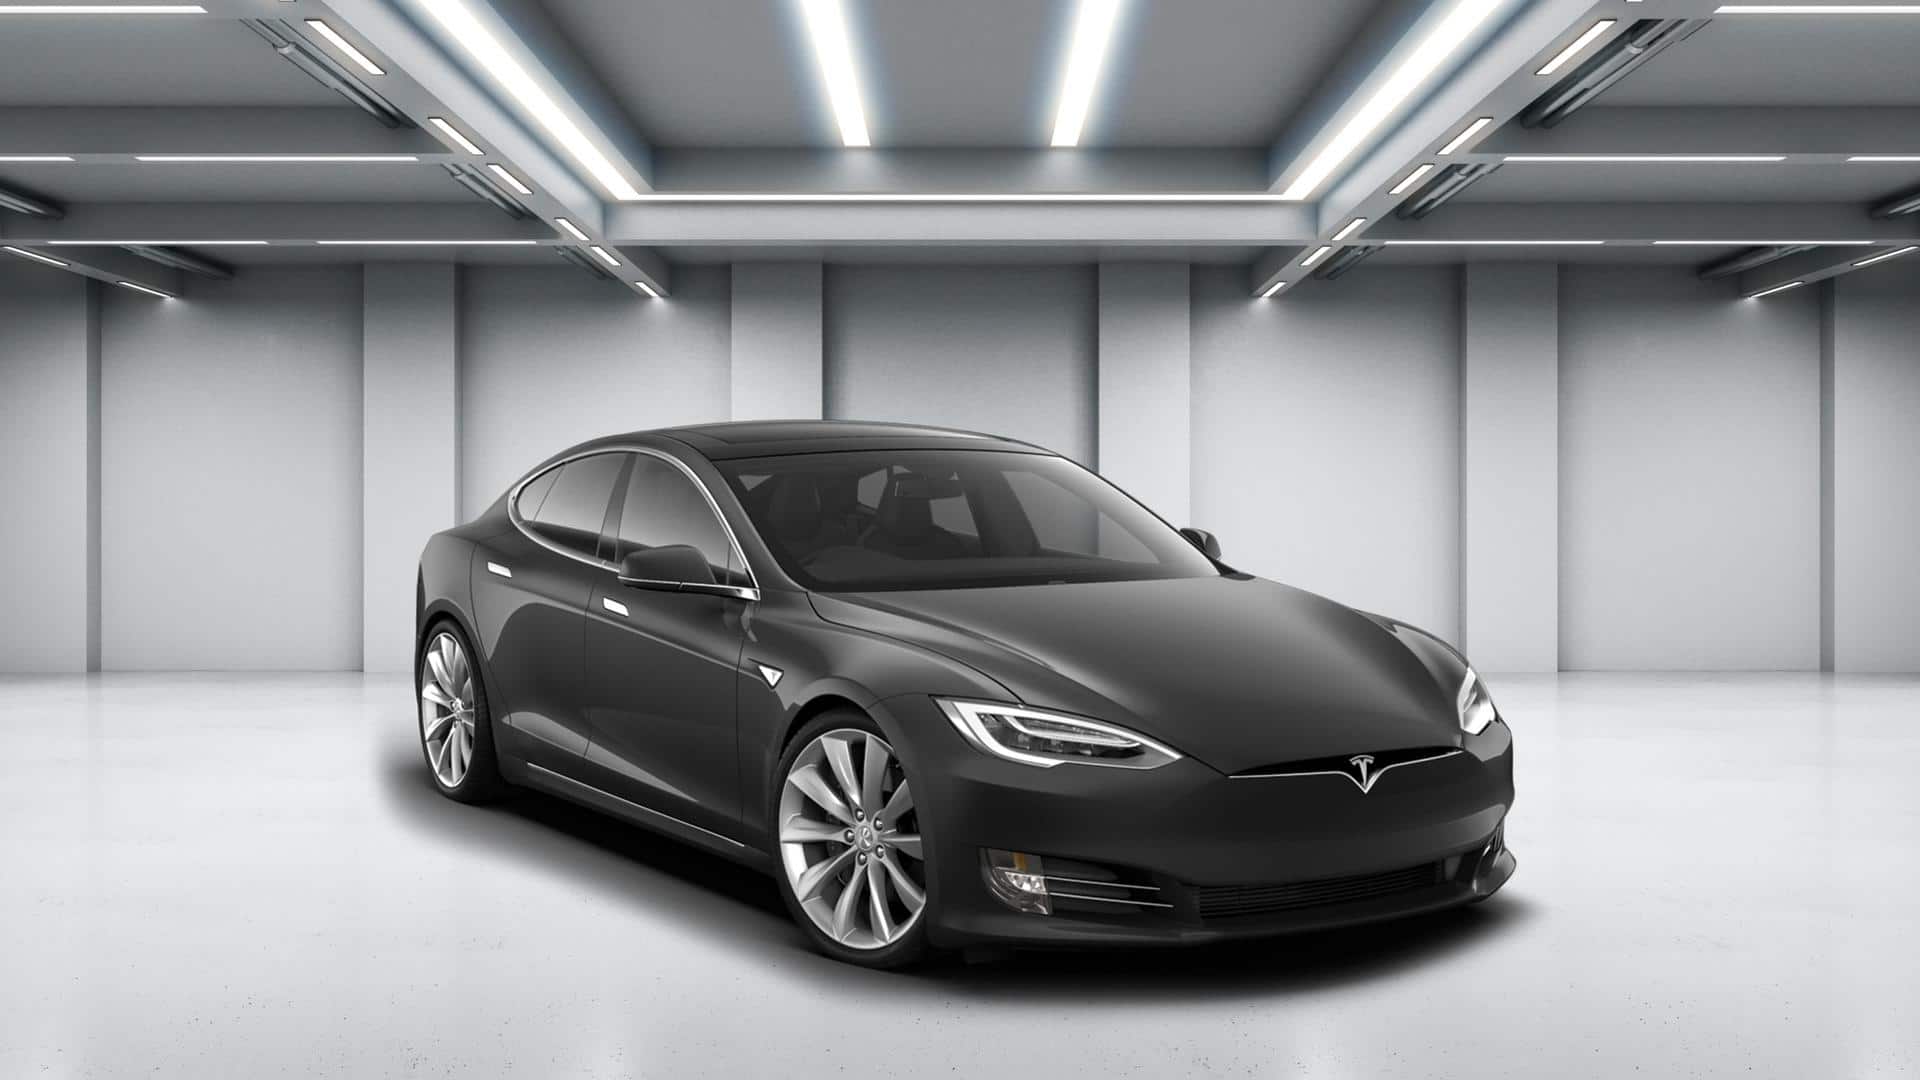 5 interesting facts to know about Tesla